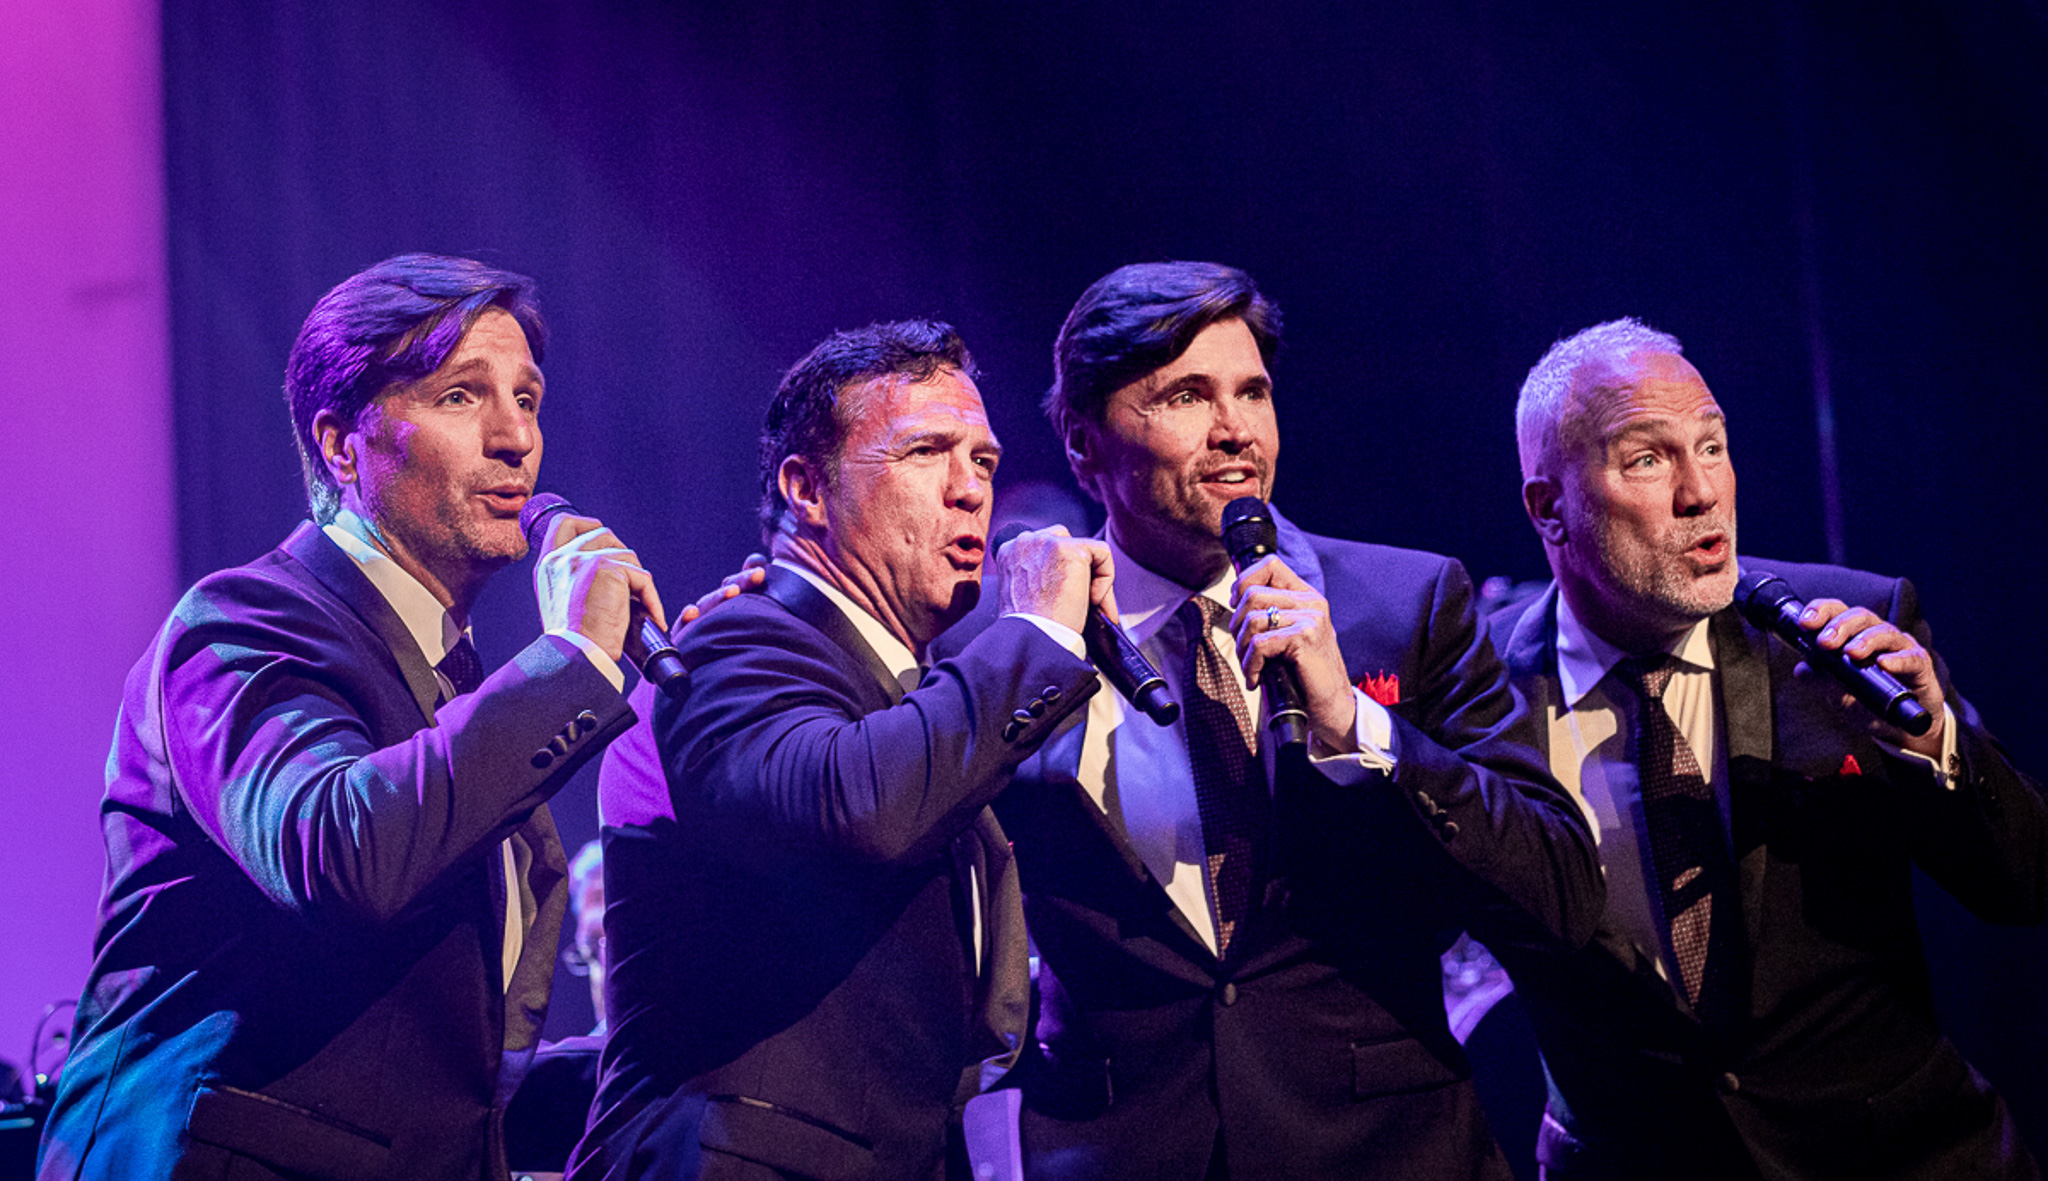 The Four Phantoms standing next to one another, performing on stage. Each is singing into a microphone